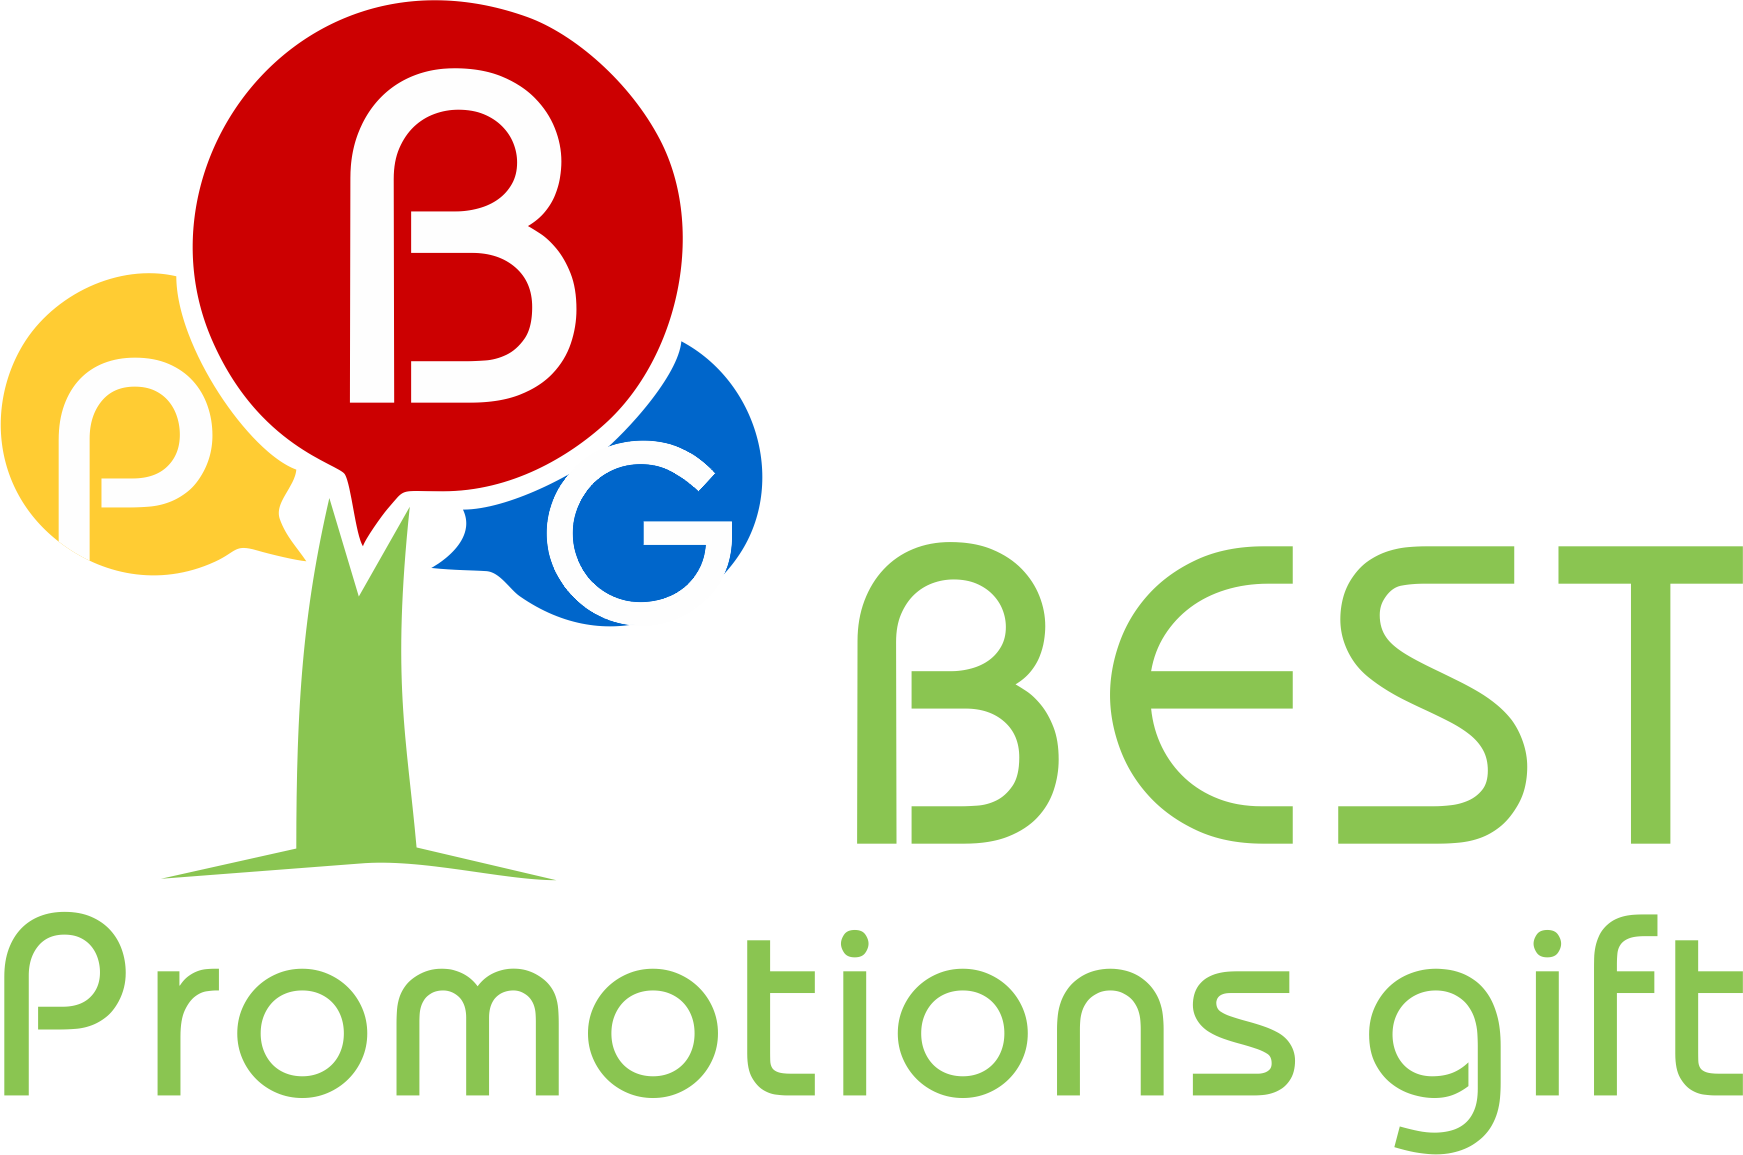 Best Promotions Gift Corp's Logo